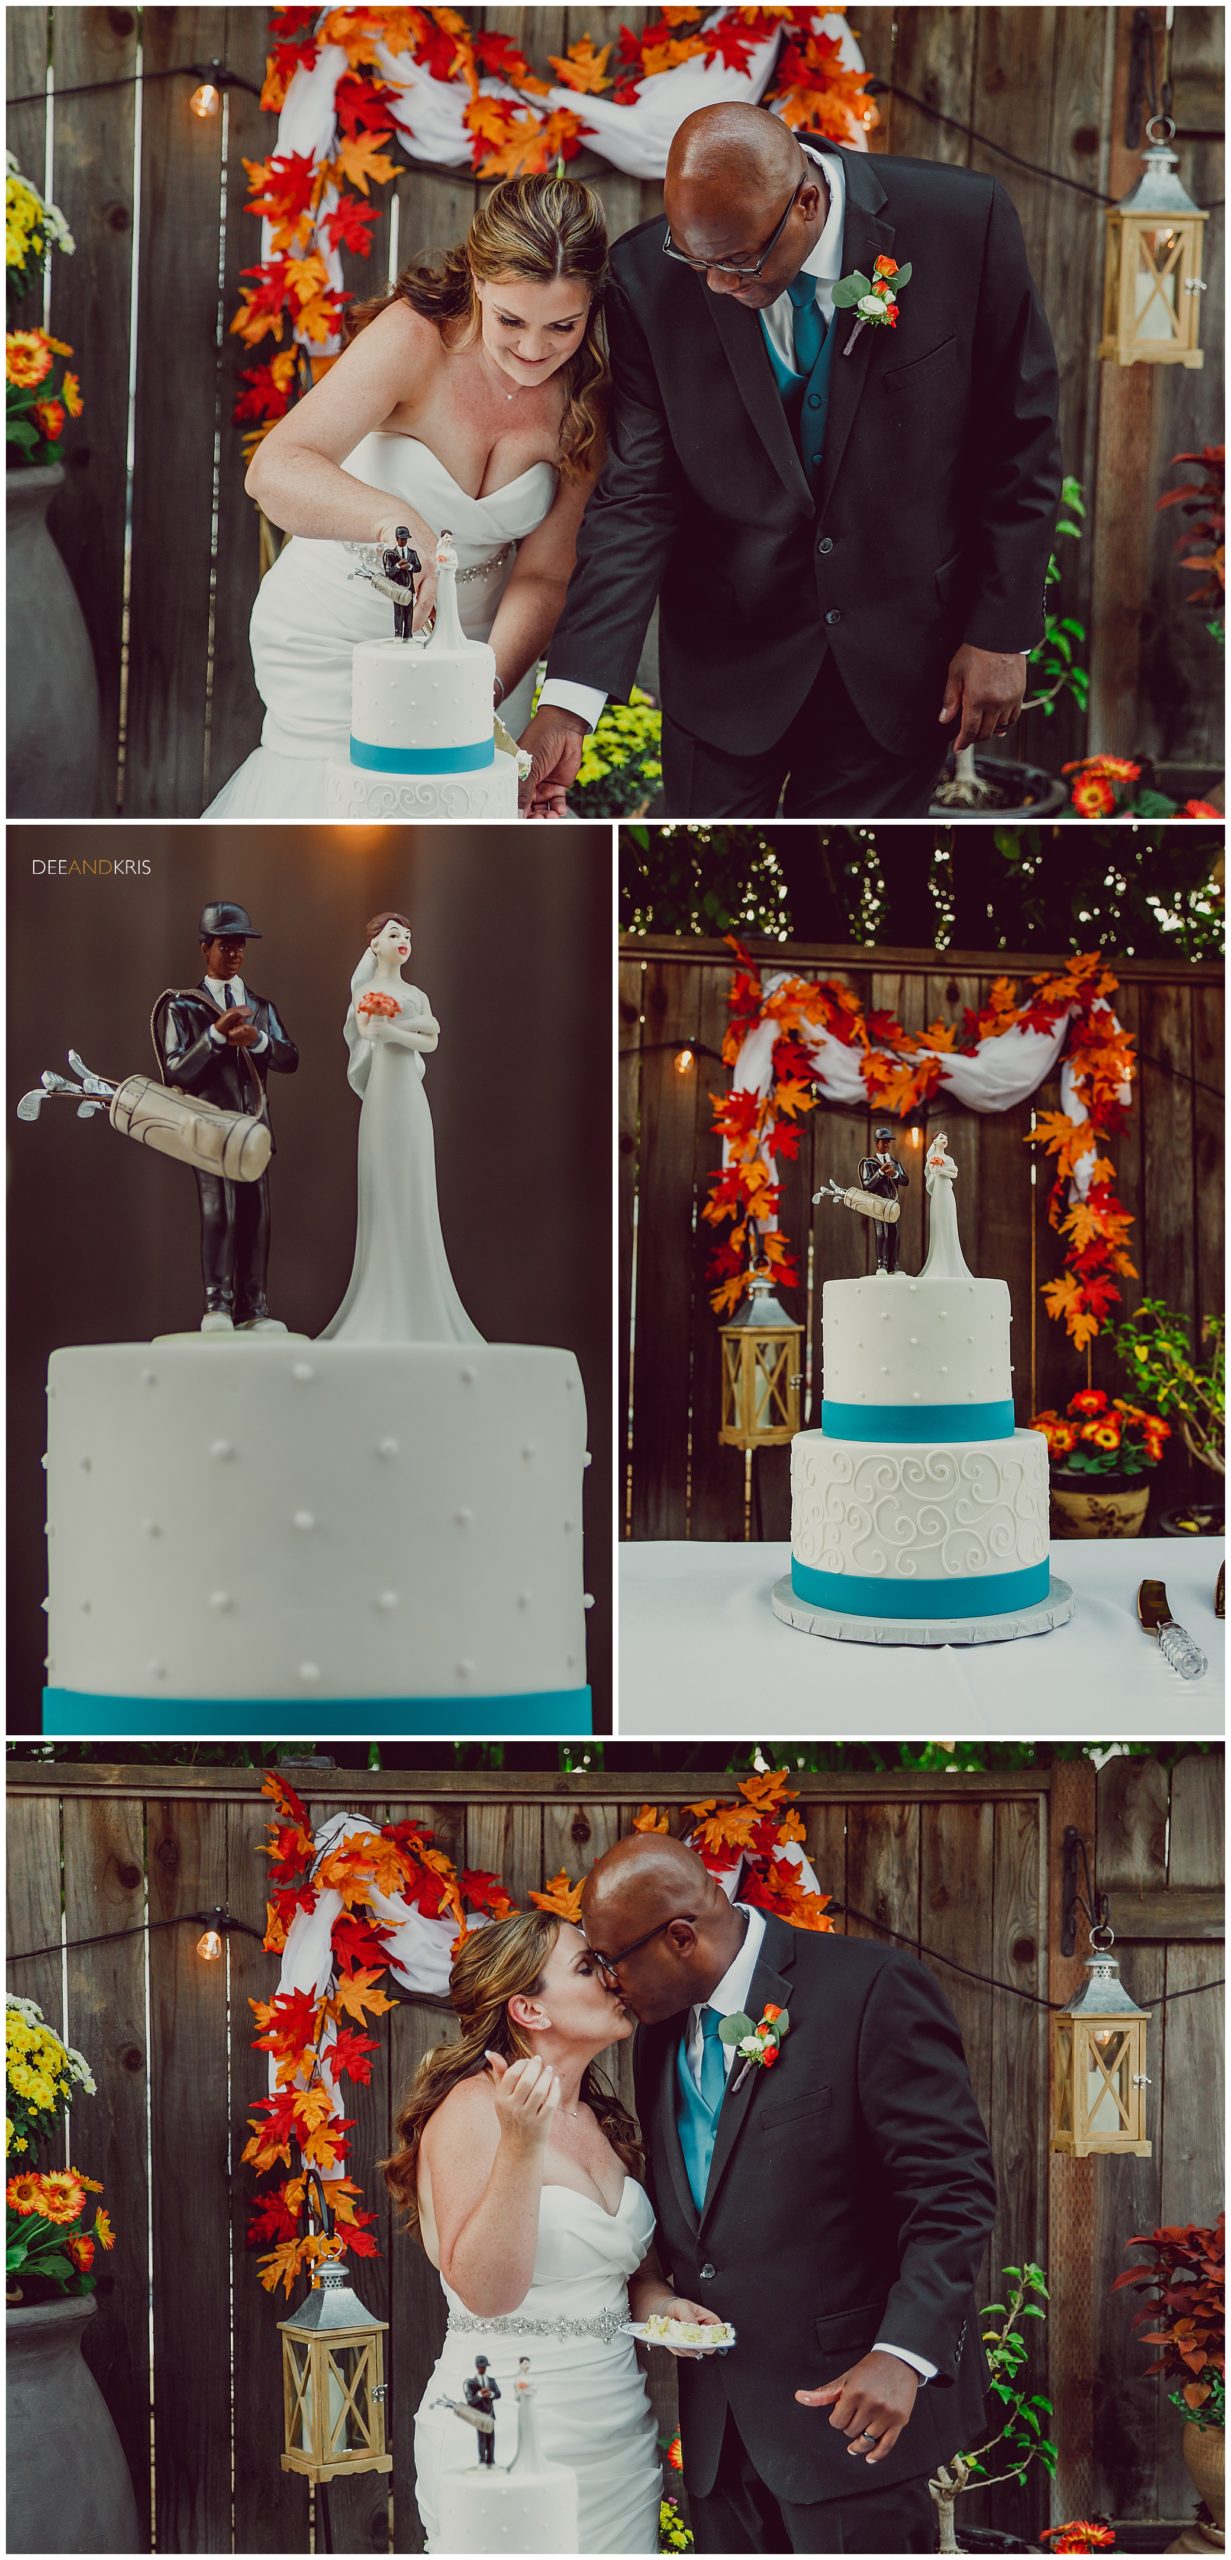 Bride and groom cut the cake at their backyard micro-wedding. Custom golfing cake topper with teal wedding cake created by Above and Beyond Cakes